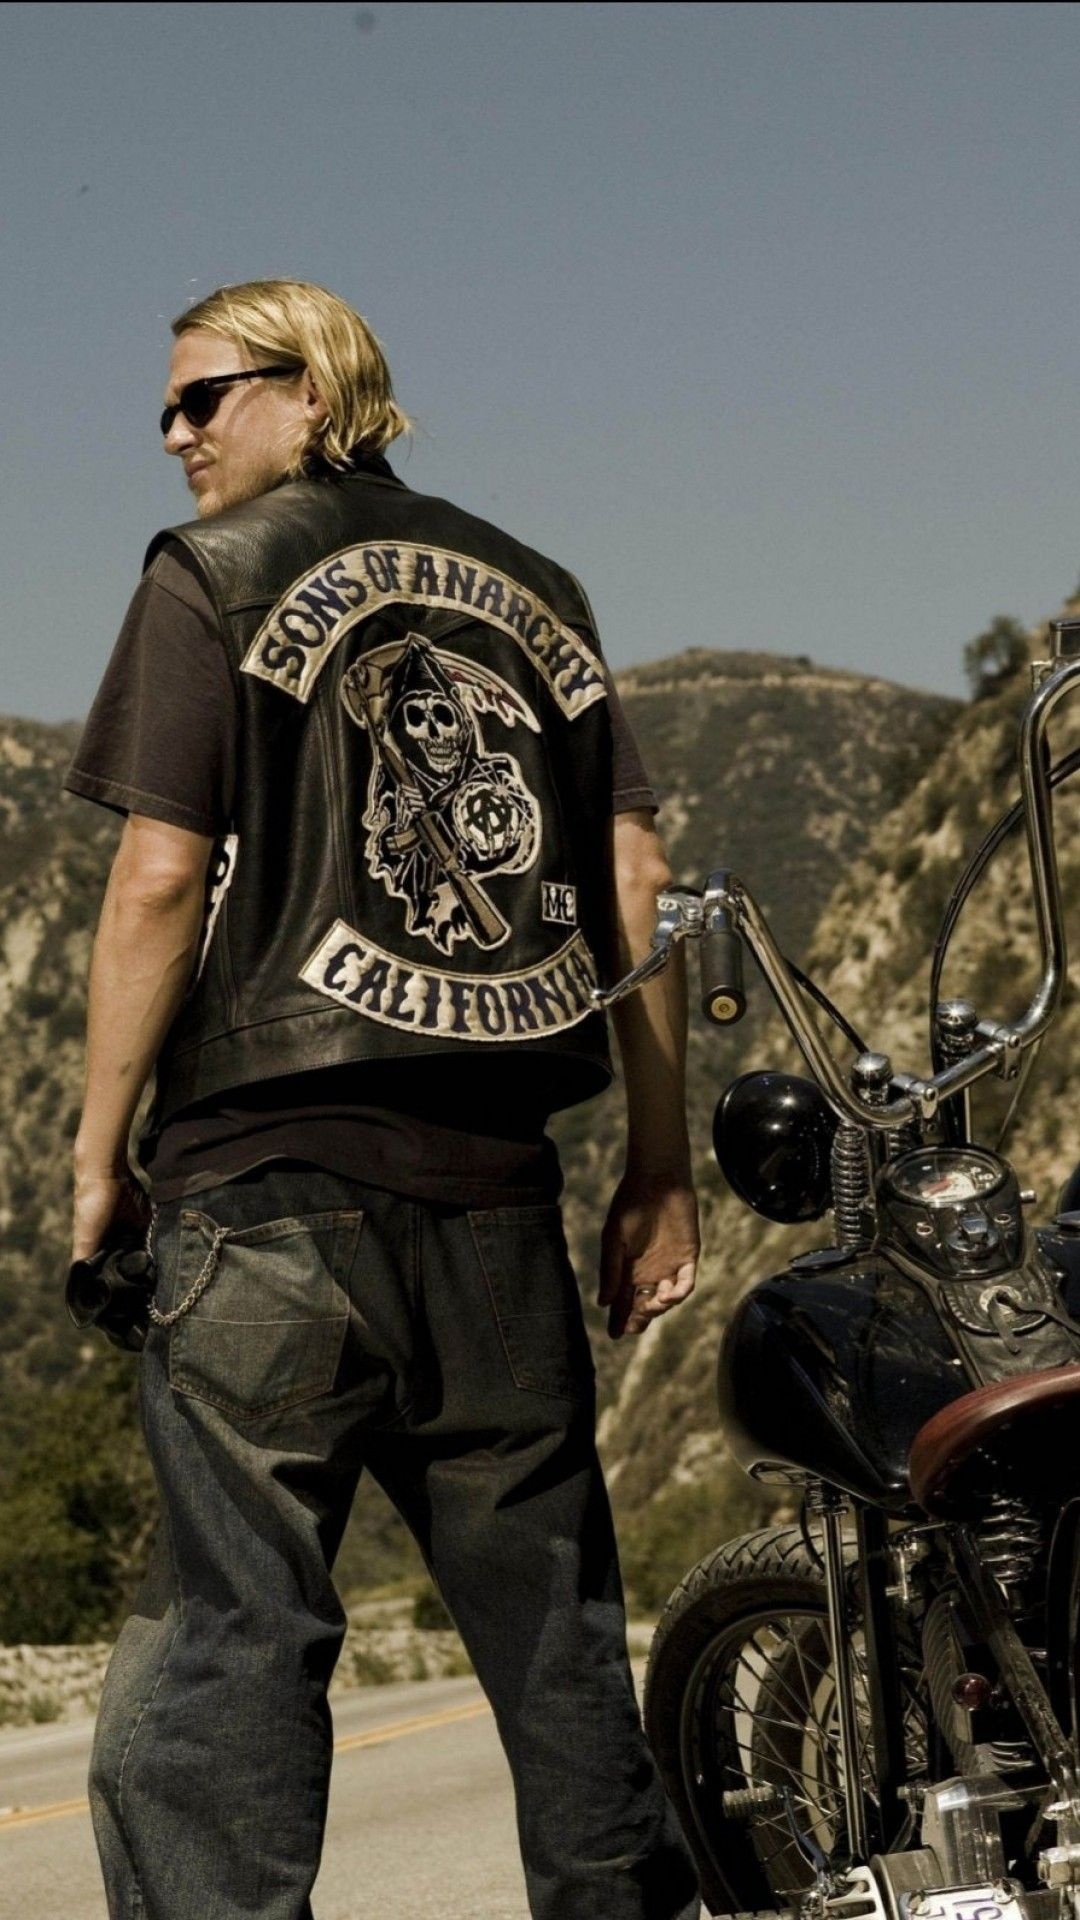 Charlie Hunnam: Sons of Anarchy, A member of the titular outlaw motorcycle club. 1080x1920 Full HD Background.